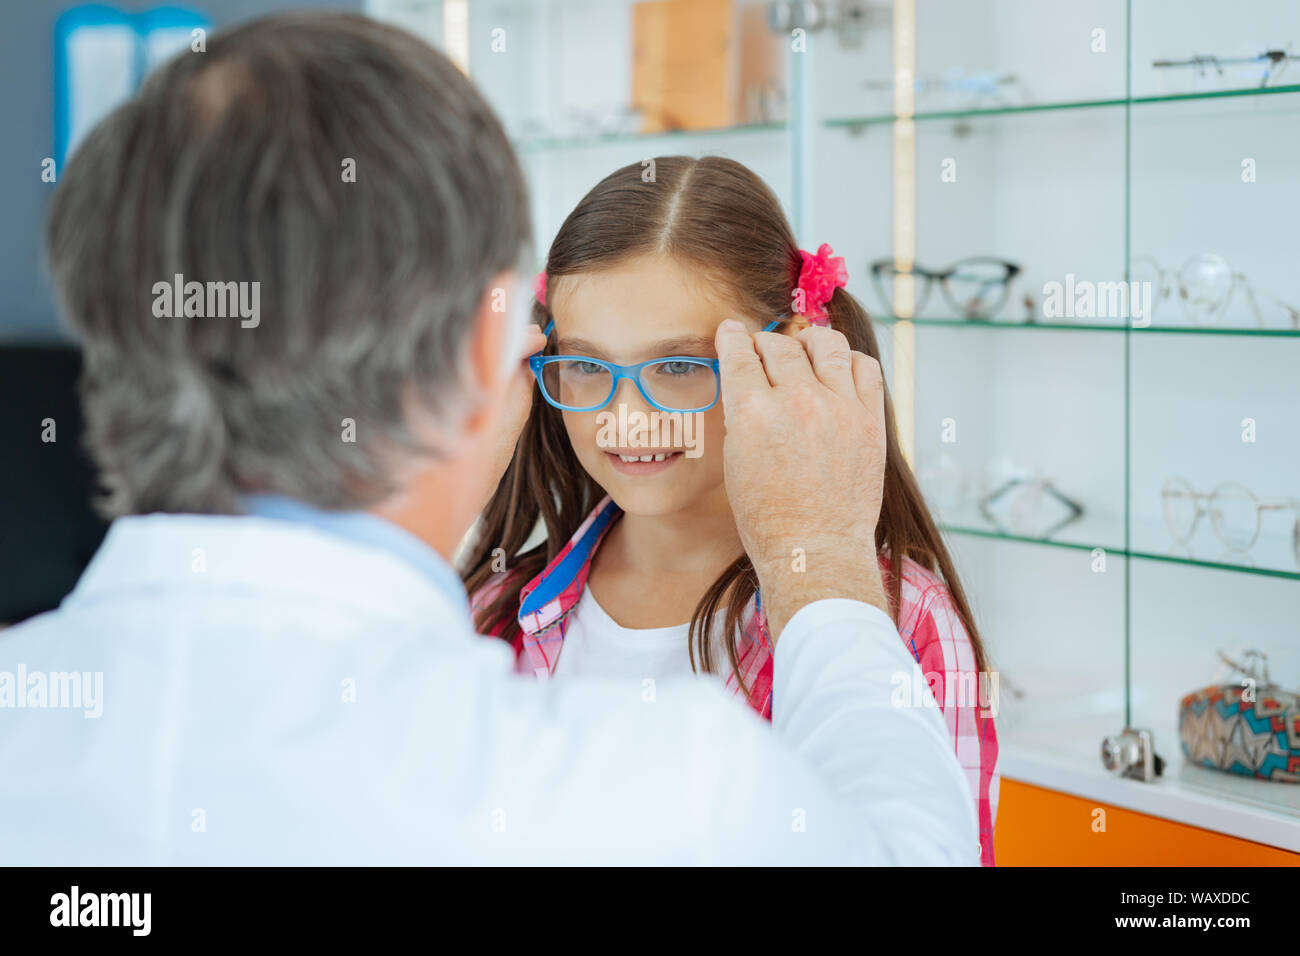 Pleasant cute girl trying on new glasses Stock Photo